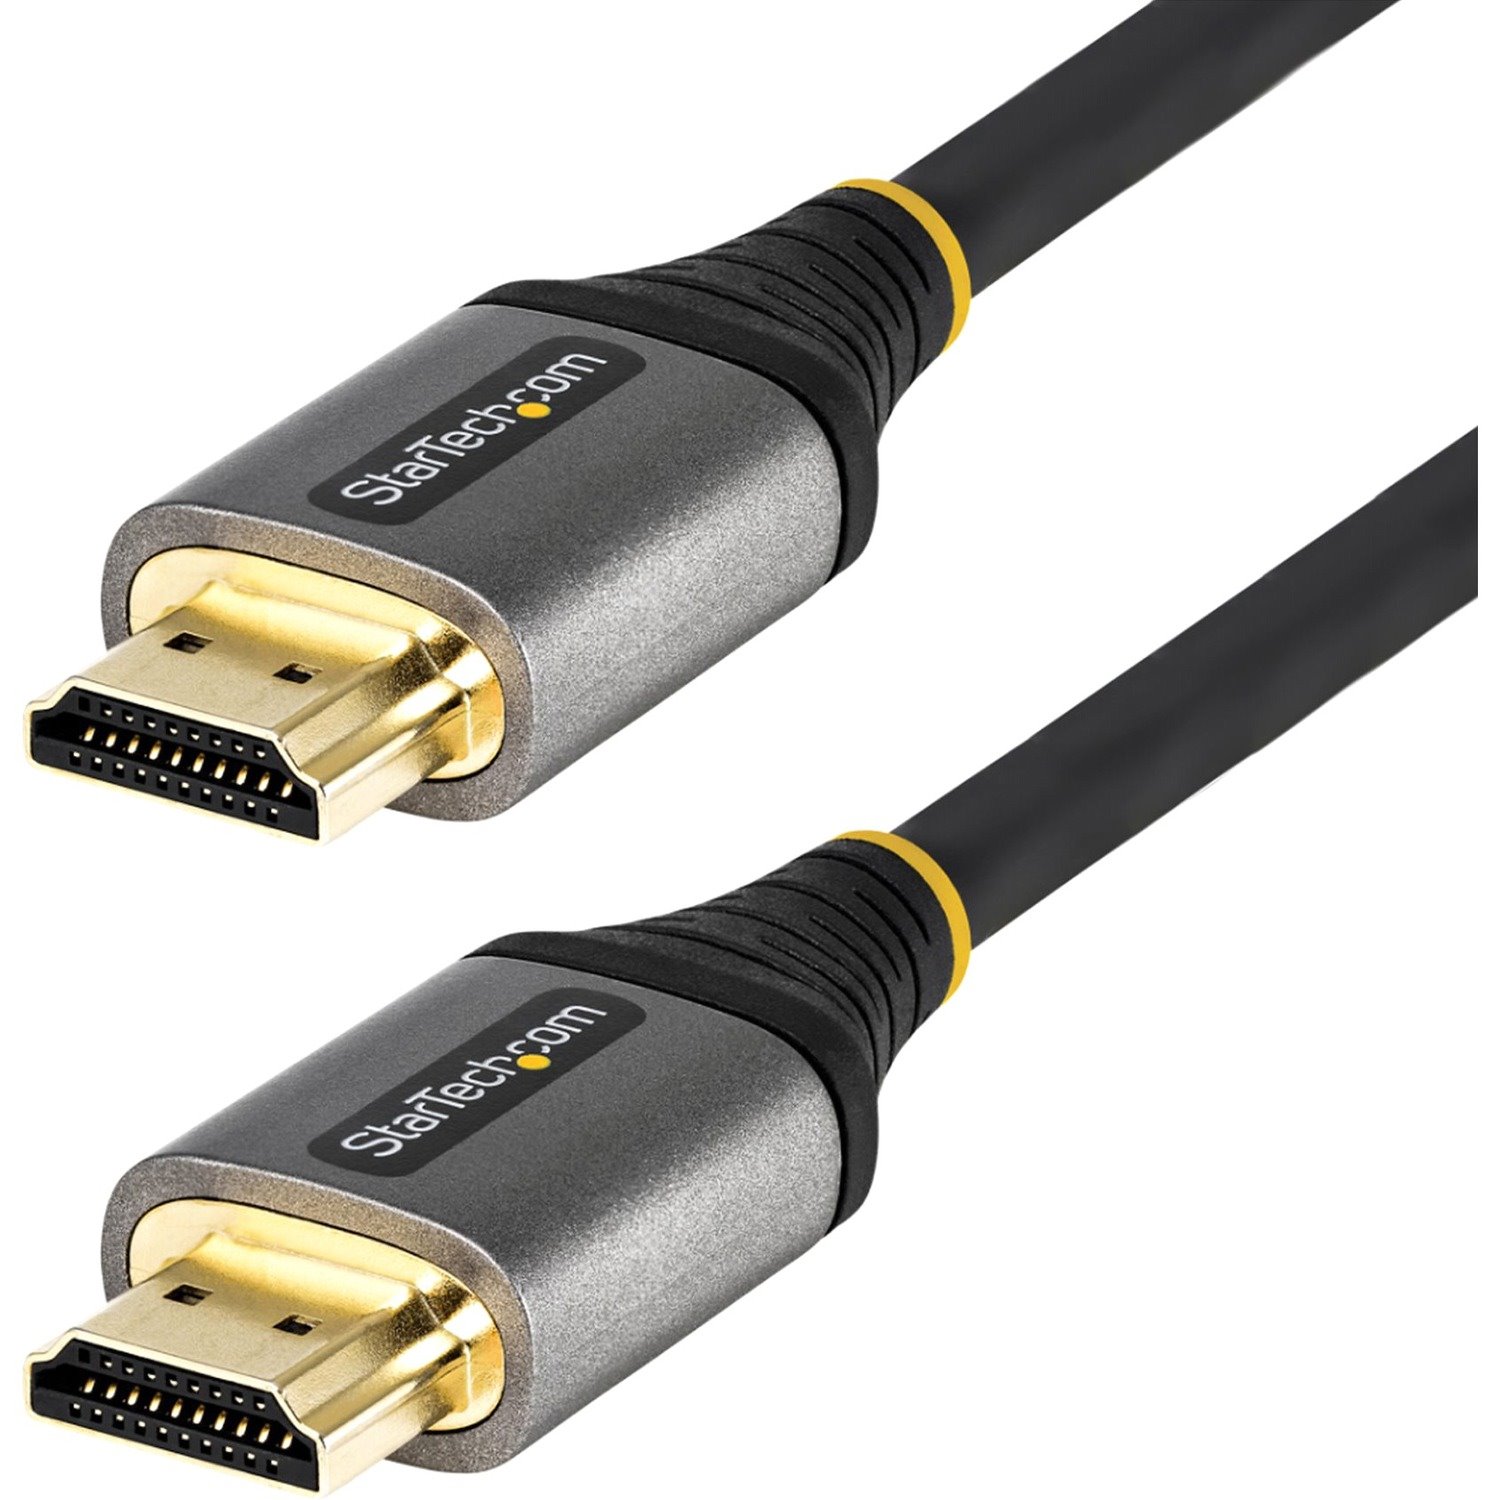 StarTech.com 50 cm HDMI A/V Cable for Audio/Video Device, Desktop Computer, Notebook, Workstation, TV, Monitor, Projector